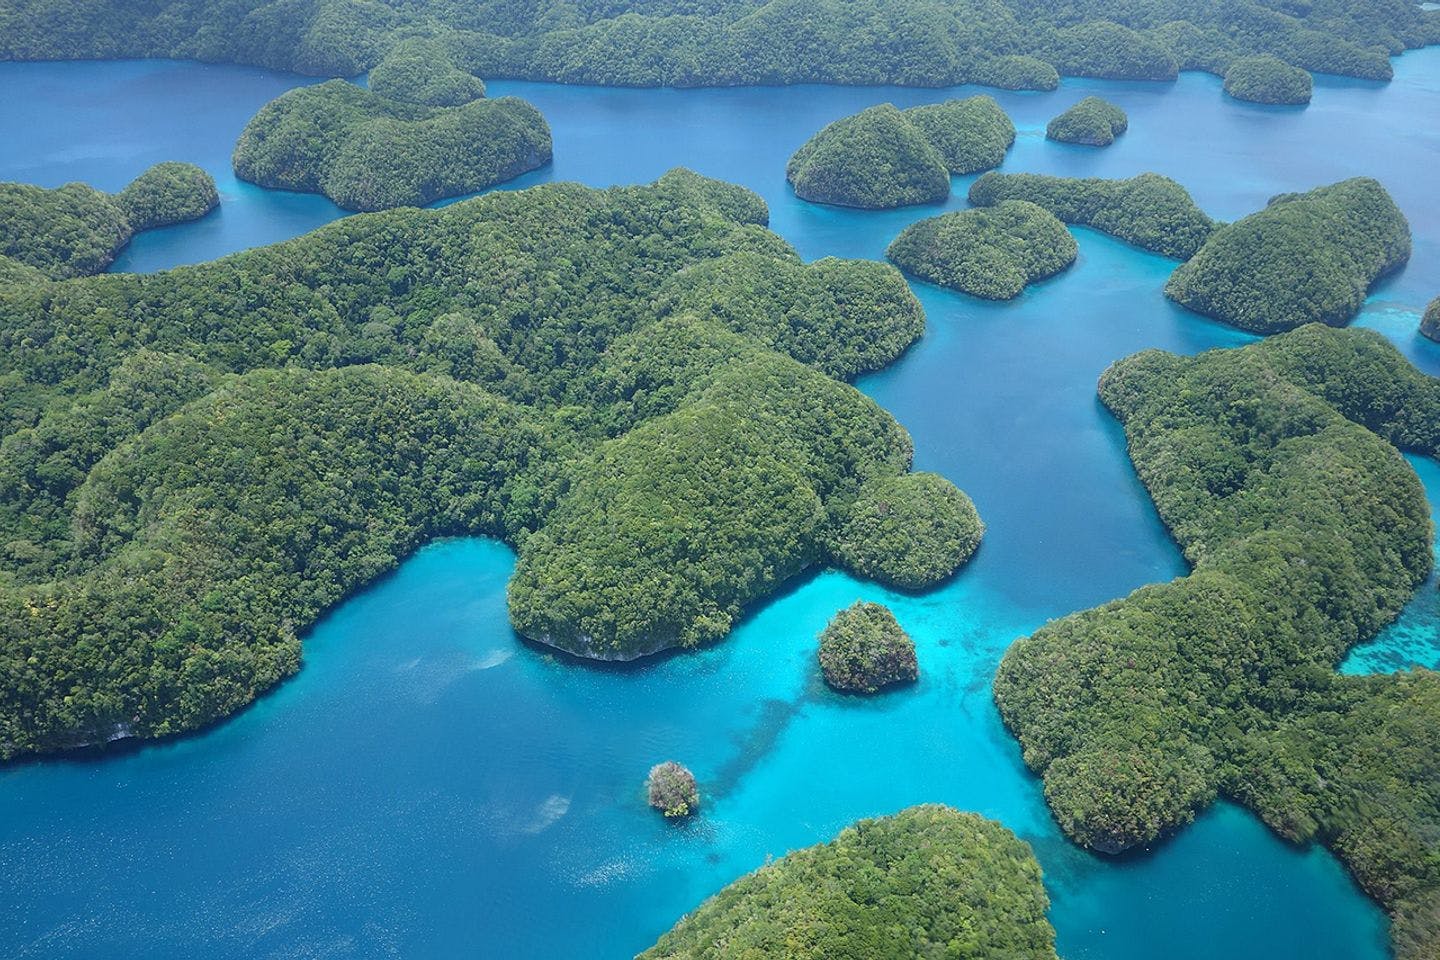 The Ngerukewid coral islands are on the UNESCO World Heritage list. Photo: Luka Peternel / Creative Commons